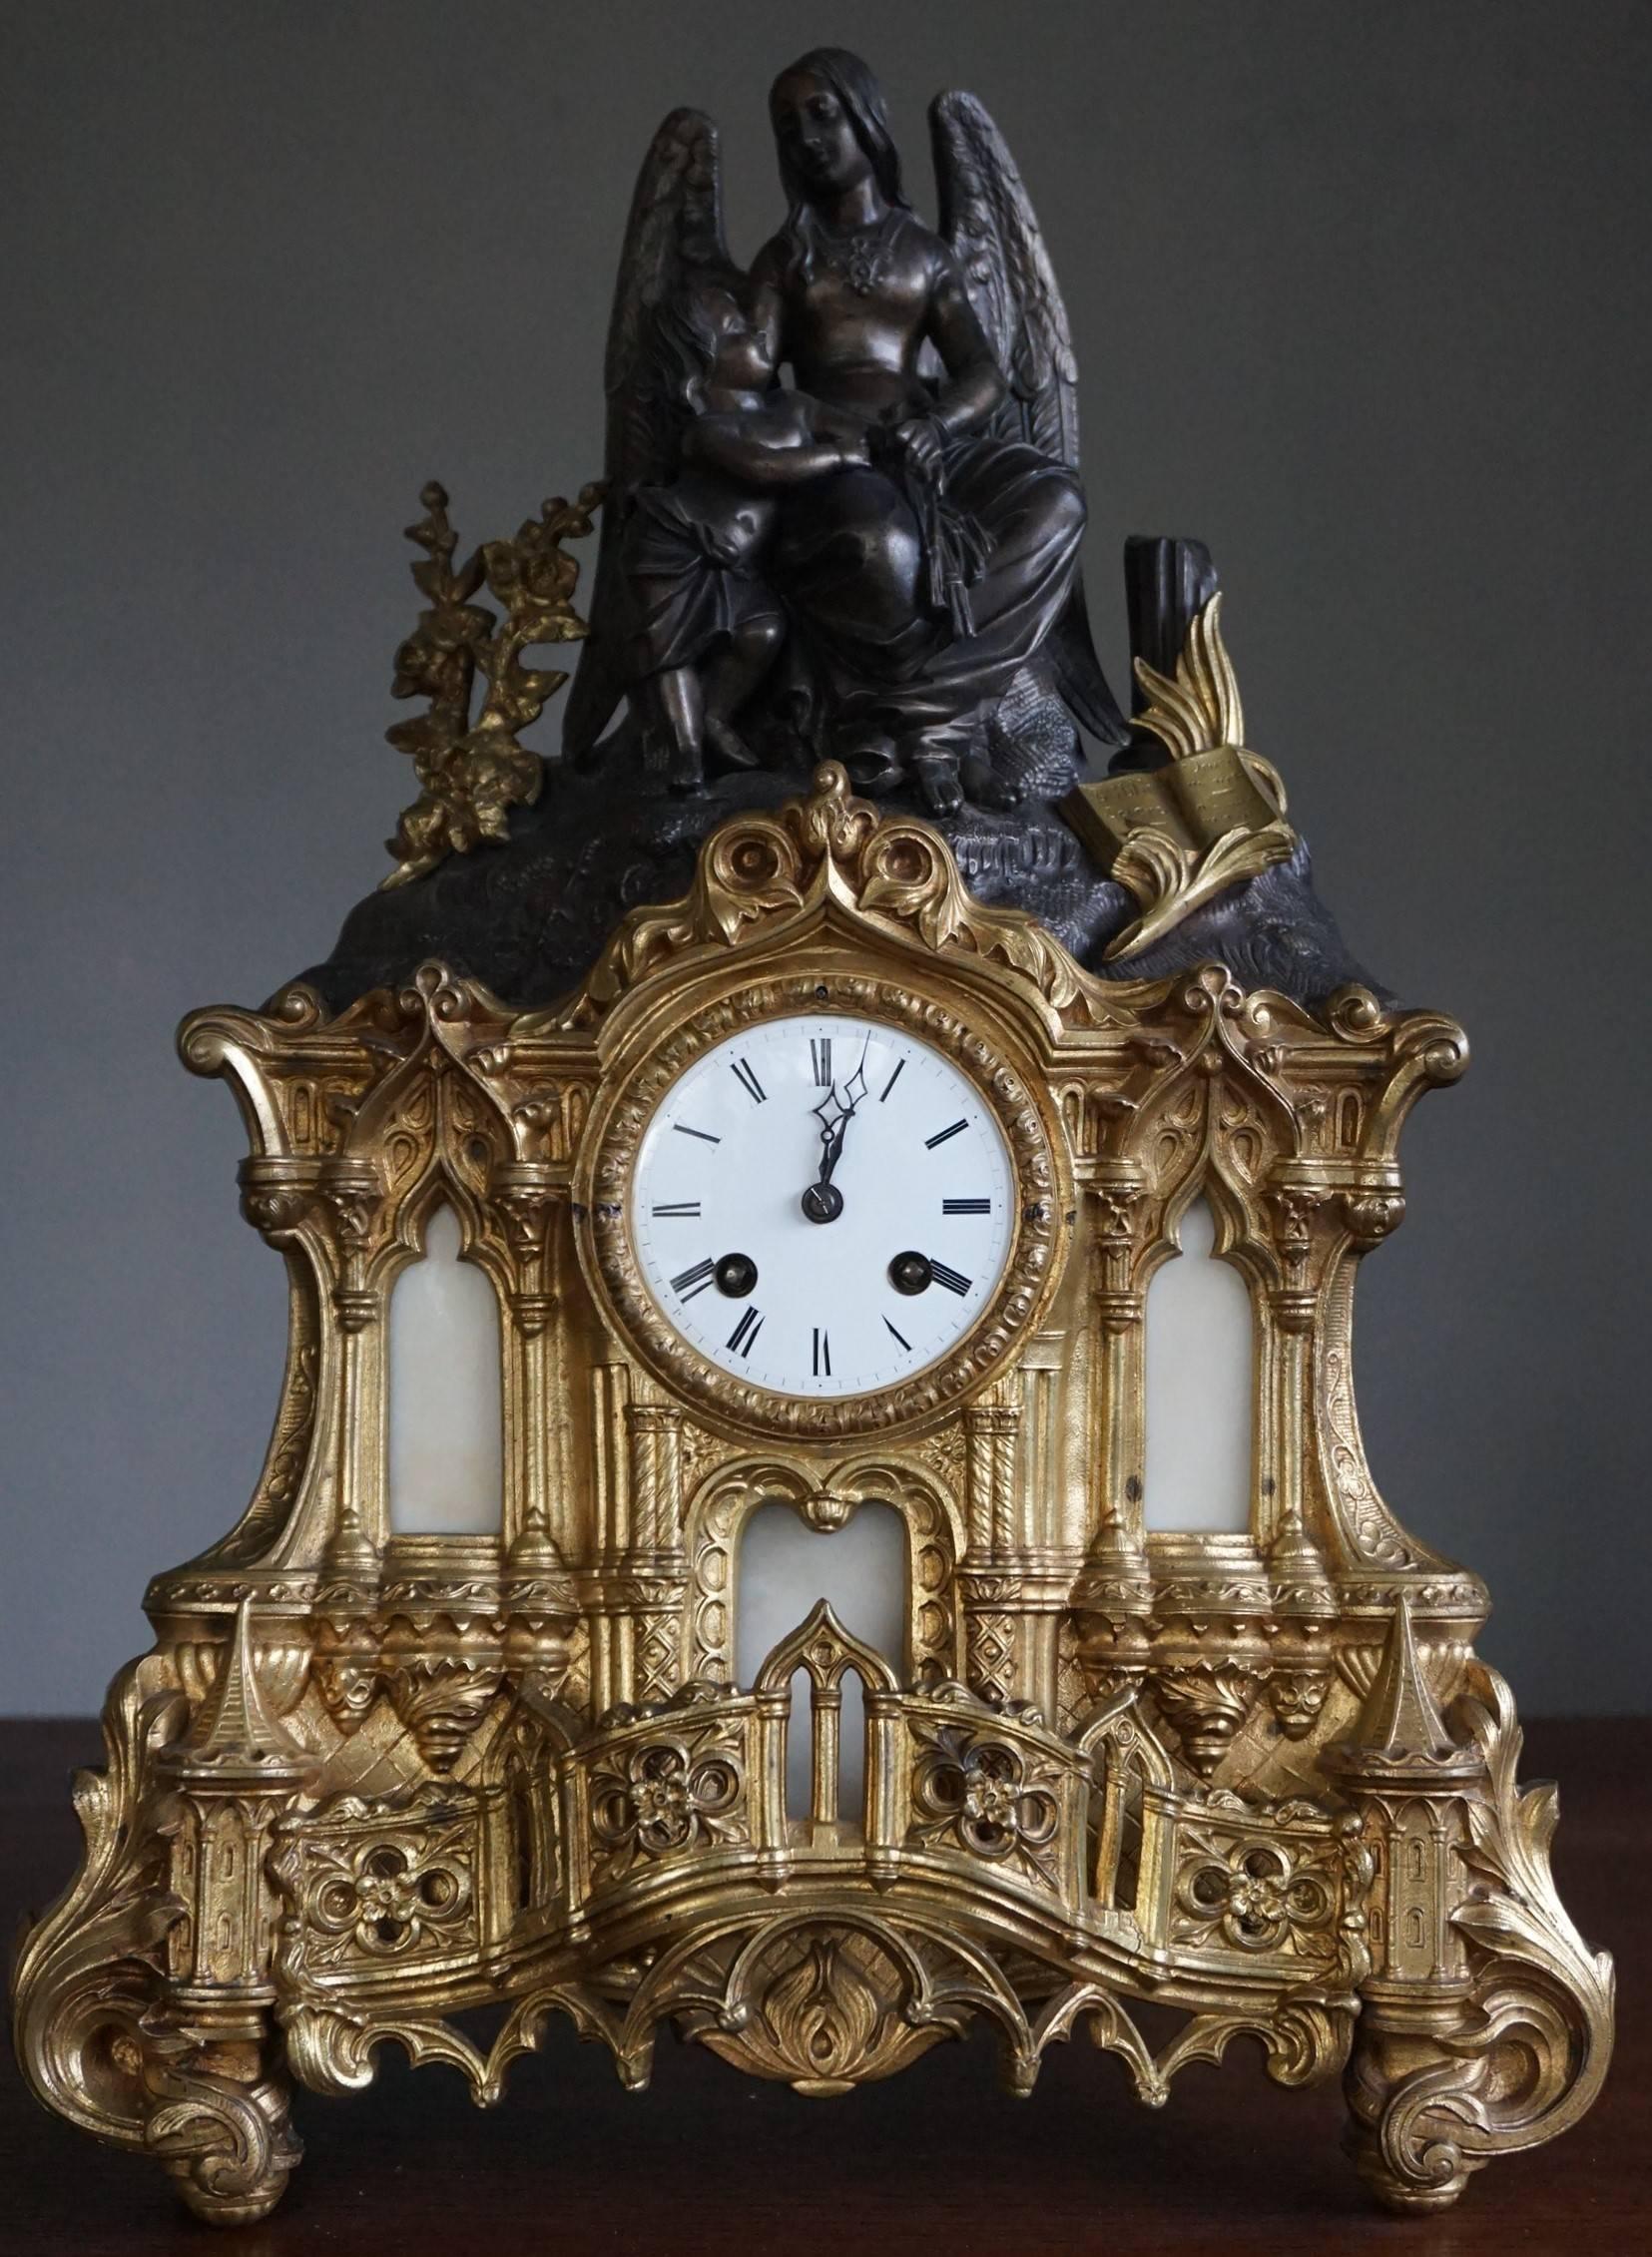 Cathedral design, gilt bronze and zinc clock.

This sizable, handcrafted, gracious and meaningful clock comes with a variety of Gothic church elements. As a matter of fact, the bottom half of this mantle clock very much resembles the entrance of a